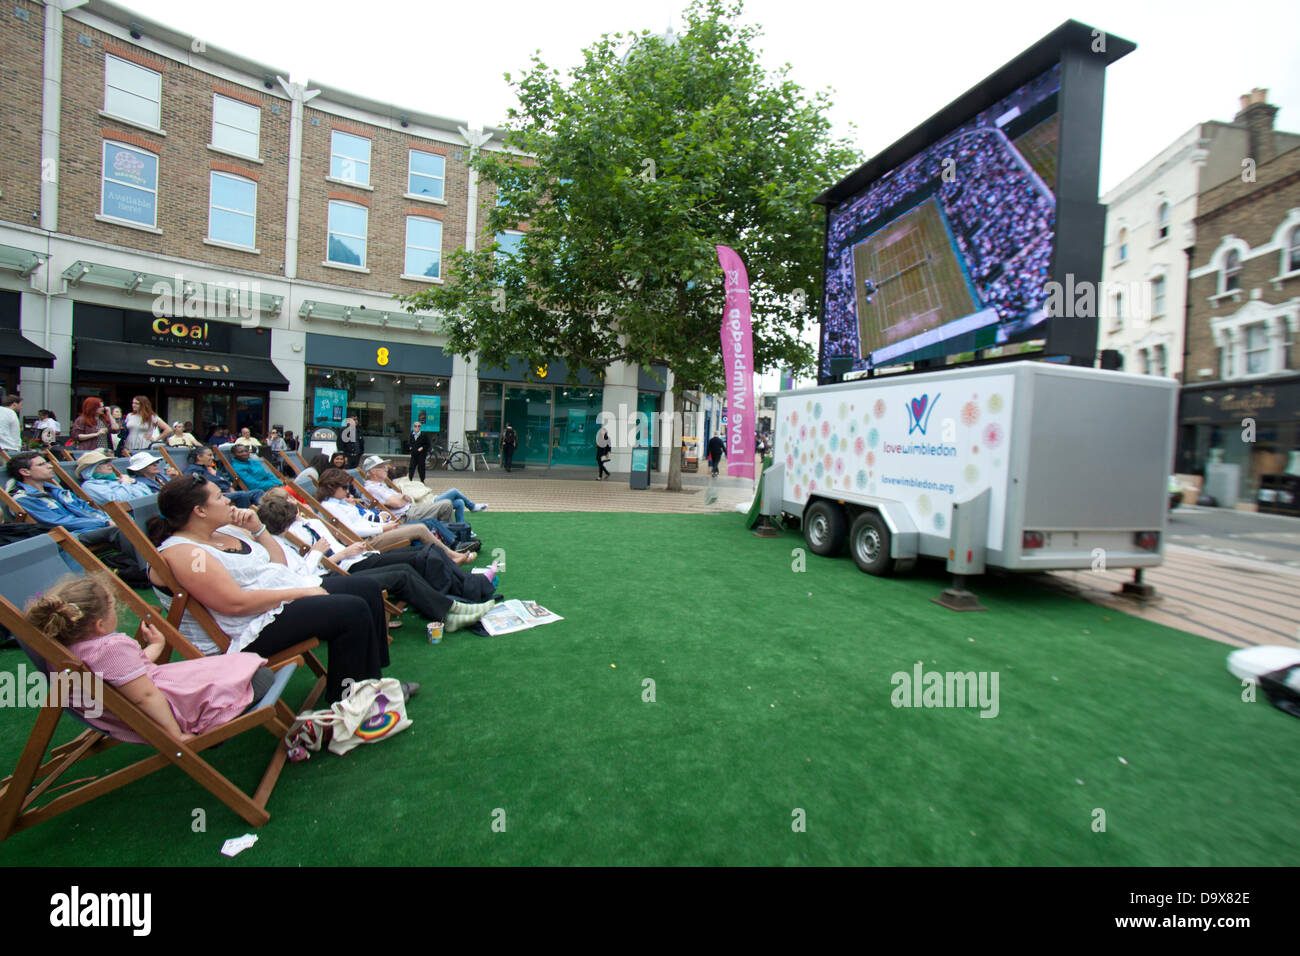 Wimbledon, London, UK. 27th June 2013.  Shoppers and members of the public enjoy watching live matches broadcast on  a giant electronic screen in  Wimbledon town centre. Credit:  amer ghazzal/Alamy Live News Stock Photo